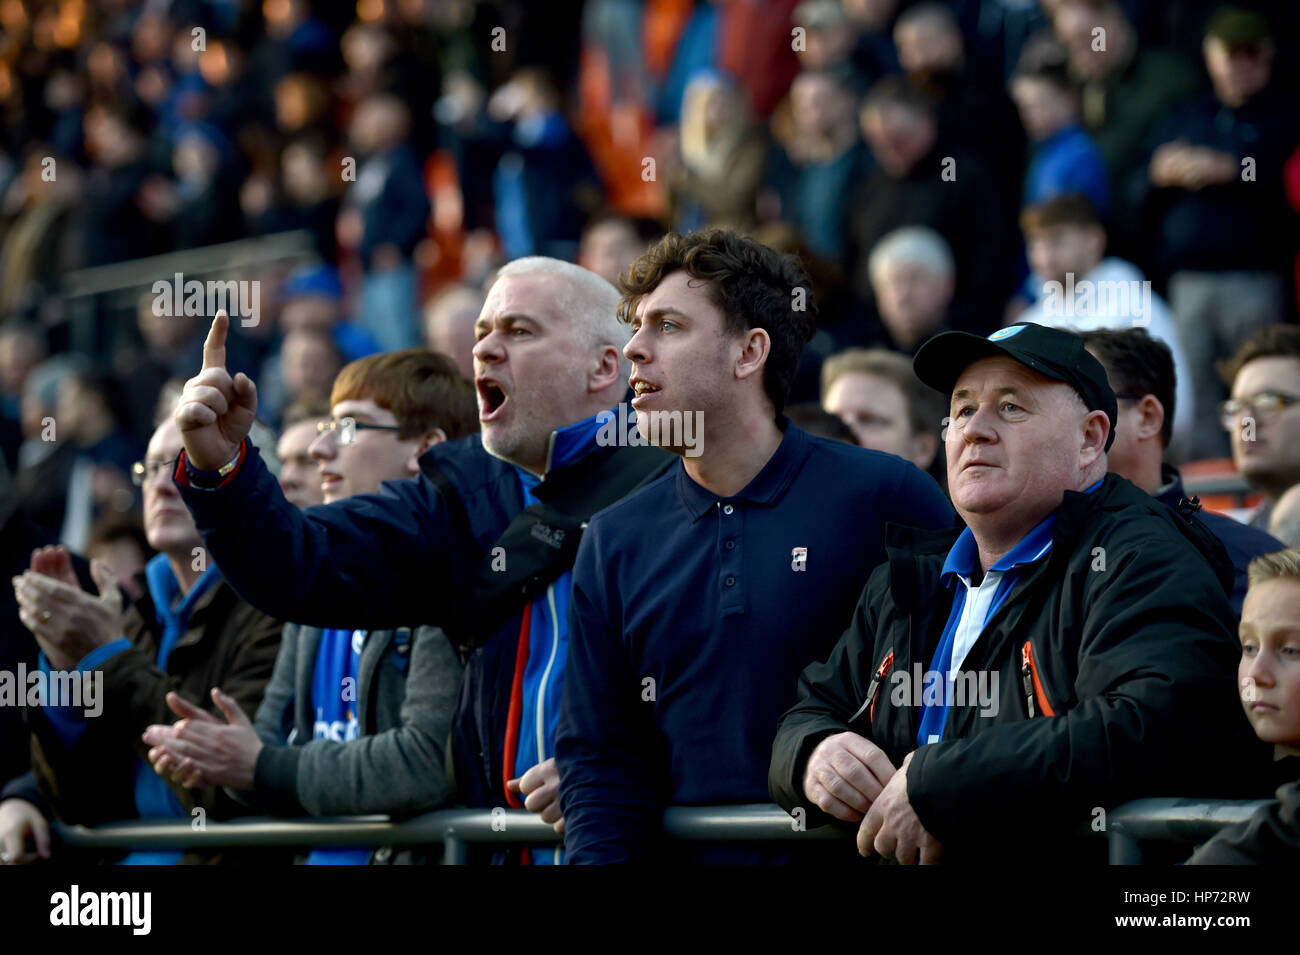 Portsmouth fans make a point after the Sky Bet League 2 match between Barnet and Portsmouth at The Hive Stadium in London. February 18, 2017.  Editorial use only. No merchandising. For Football images FA and Premier League restrictions apply inc. no internet/mobile usage without FAPL license - for details contact Football Dataco Stock Photo